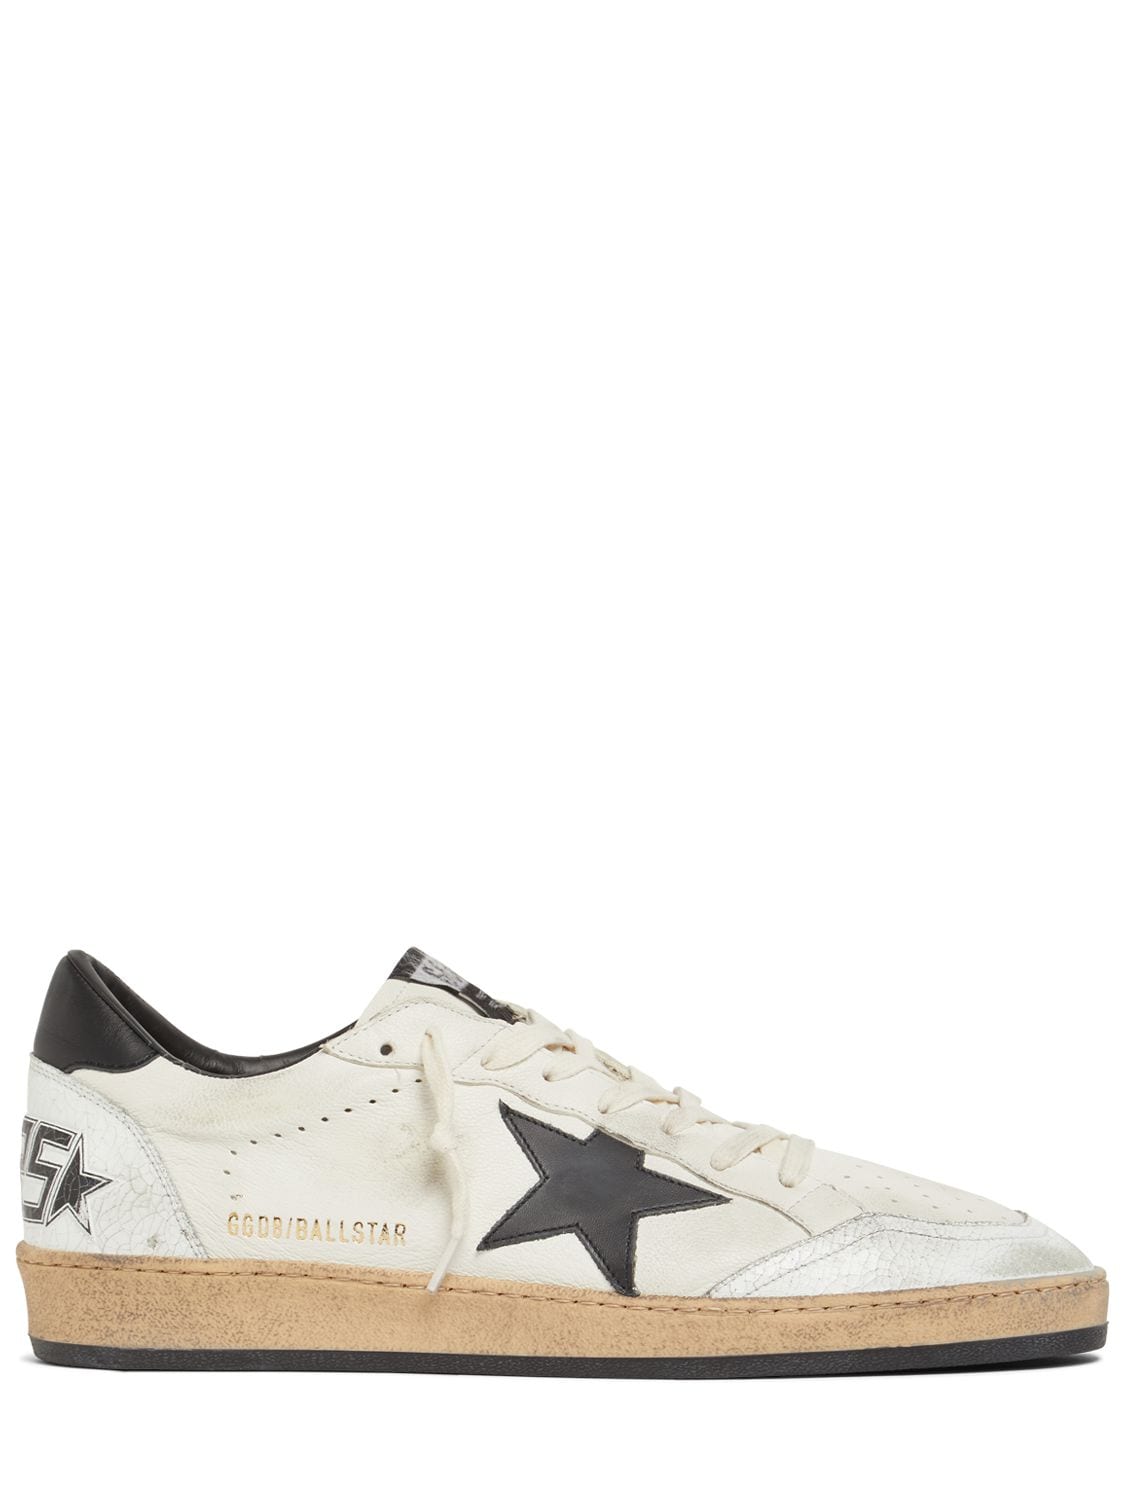 Image of Ball Star Nappa Leather Sneakers